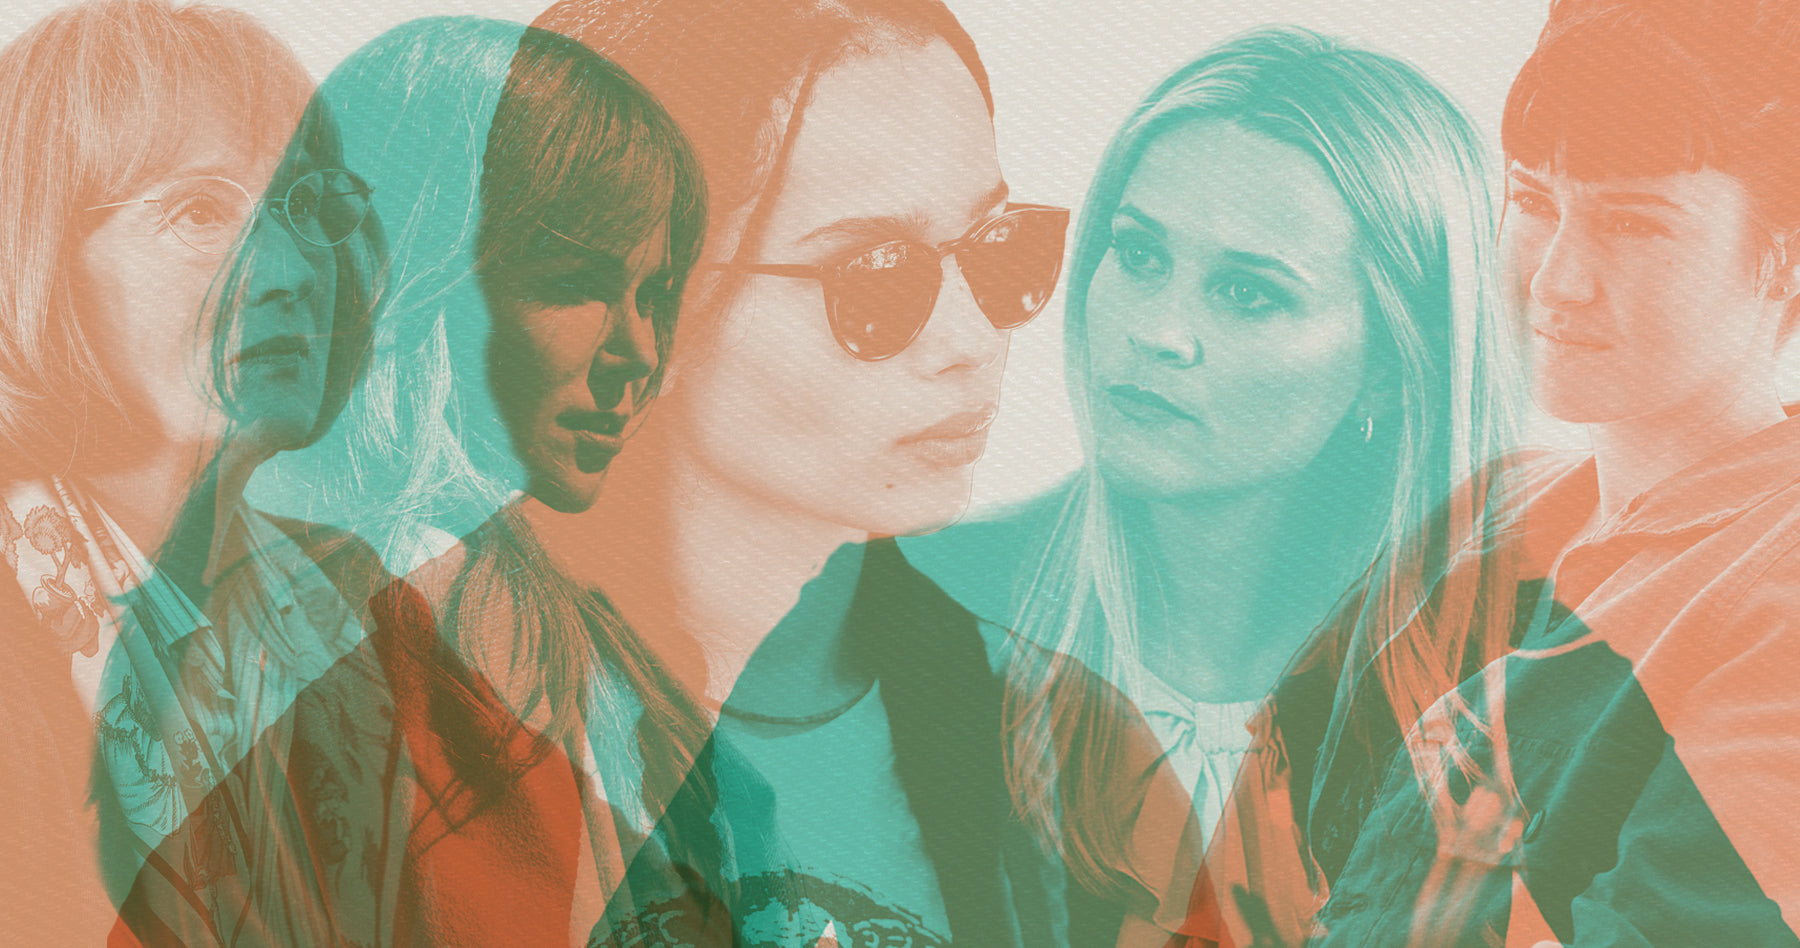 Photo collage of the cast of Big Little Lies. From left to right, characters Mary Louise (Meryl Streep), Celeste (Nicole Kidman), Bonnie (Zoë Kravitz), Madeline (Reese Witherspoon) and Jane (Shailene Woodley)